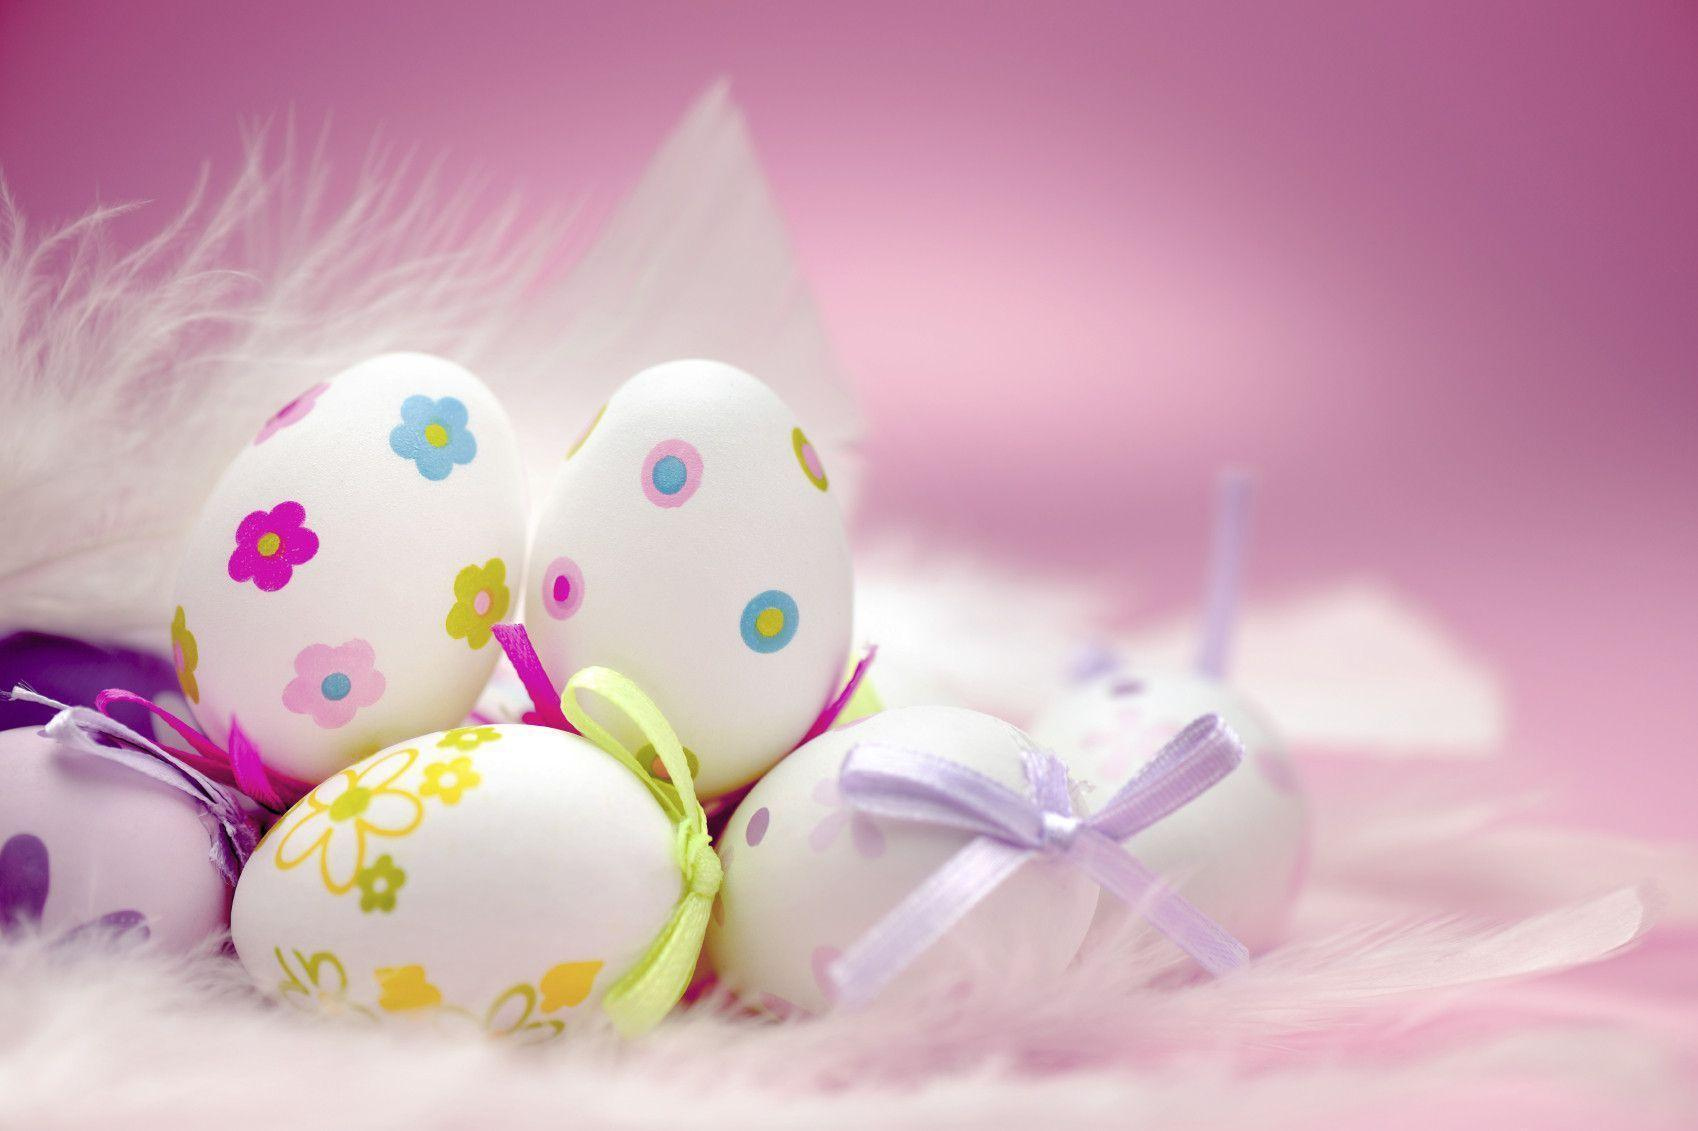 Happy Easter Wallpapers Pictures Wallpaper Cave